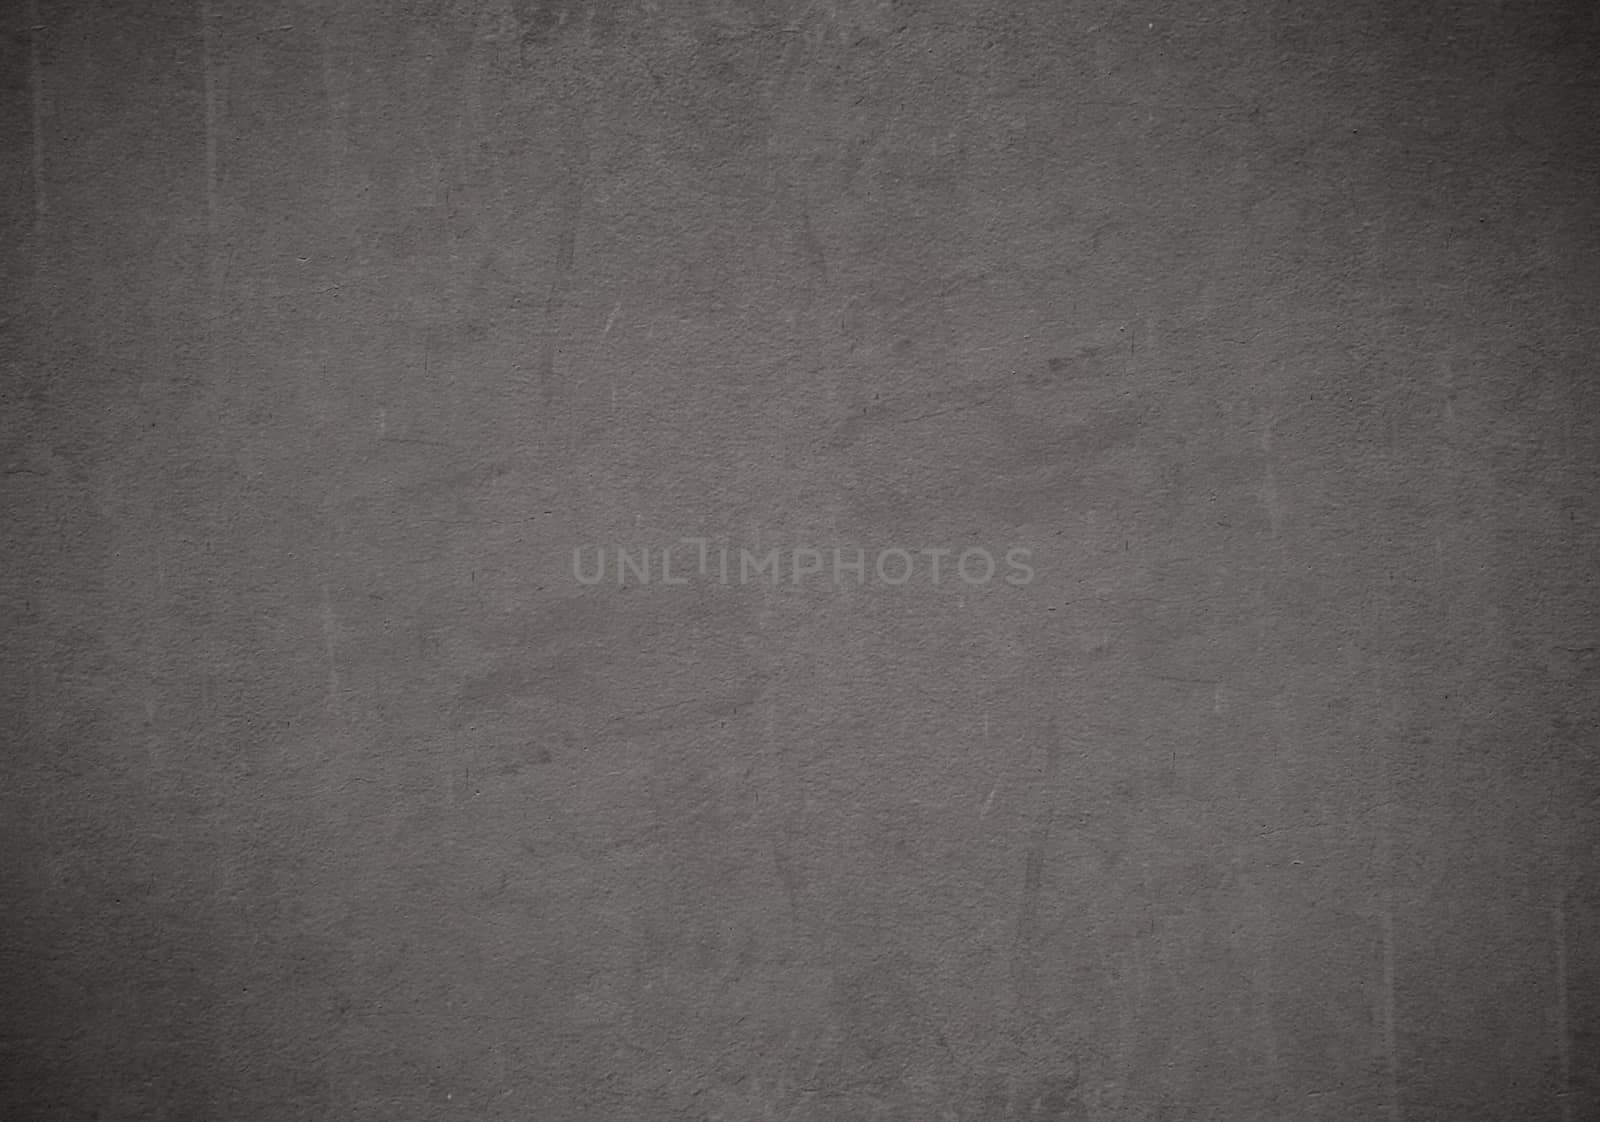 Gray concrete wall texture background.